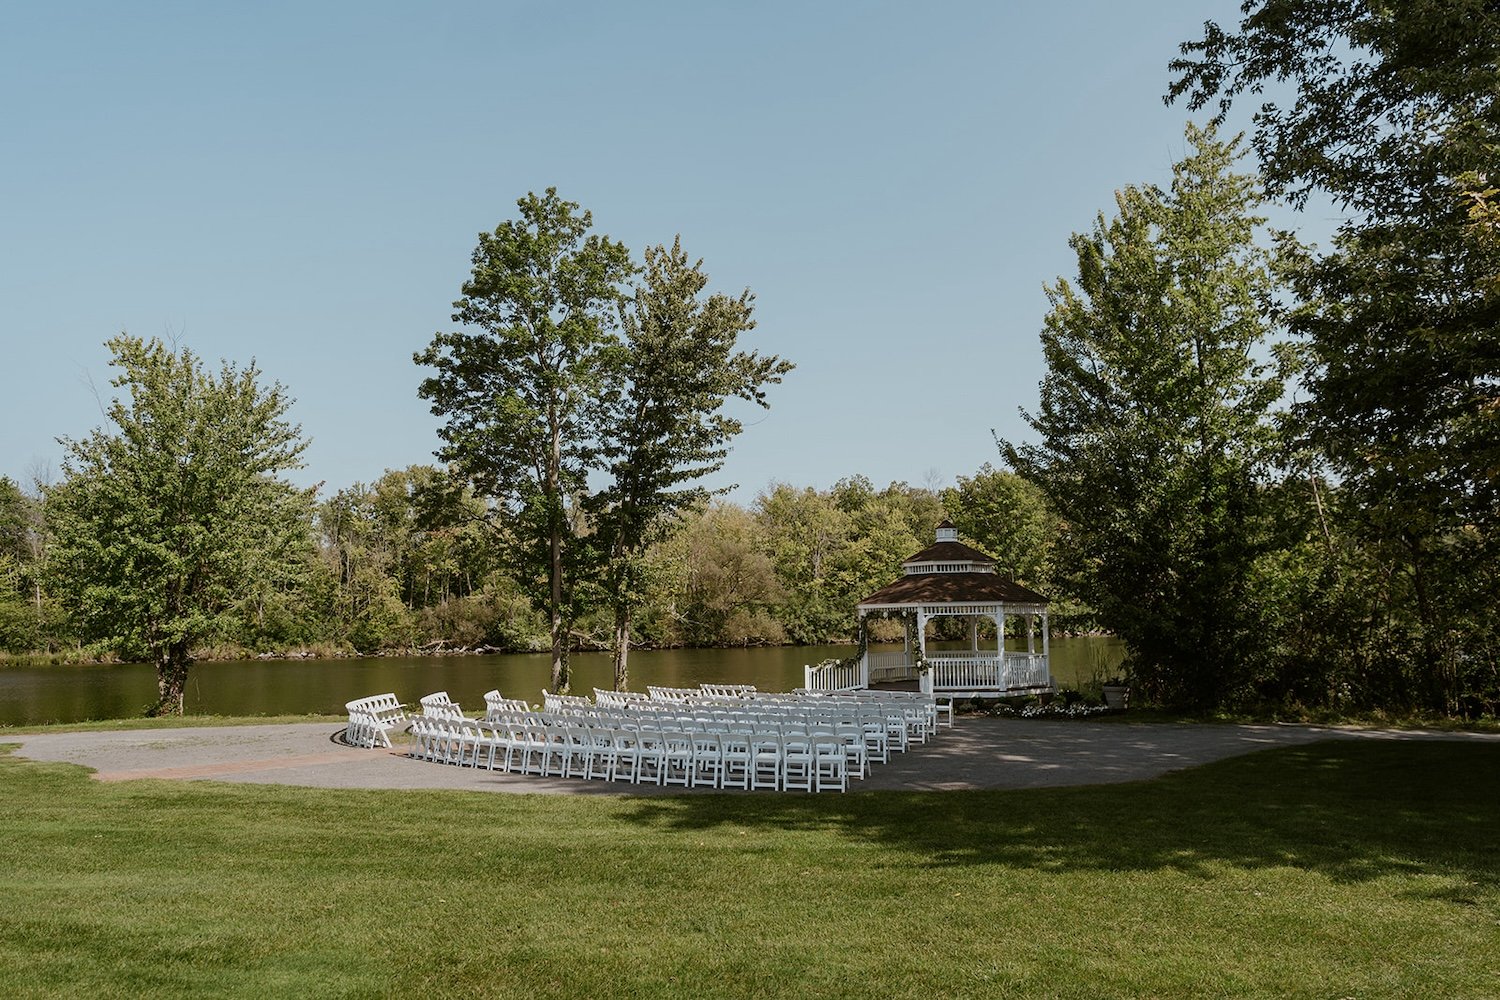 View of the wedding ceremony location over looking the water.